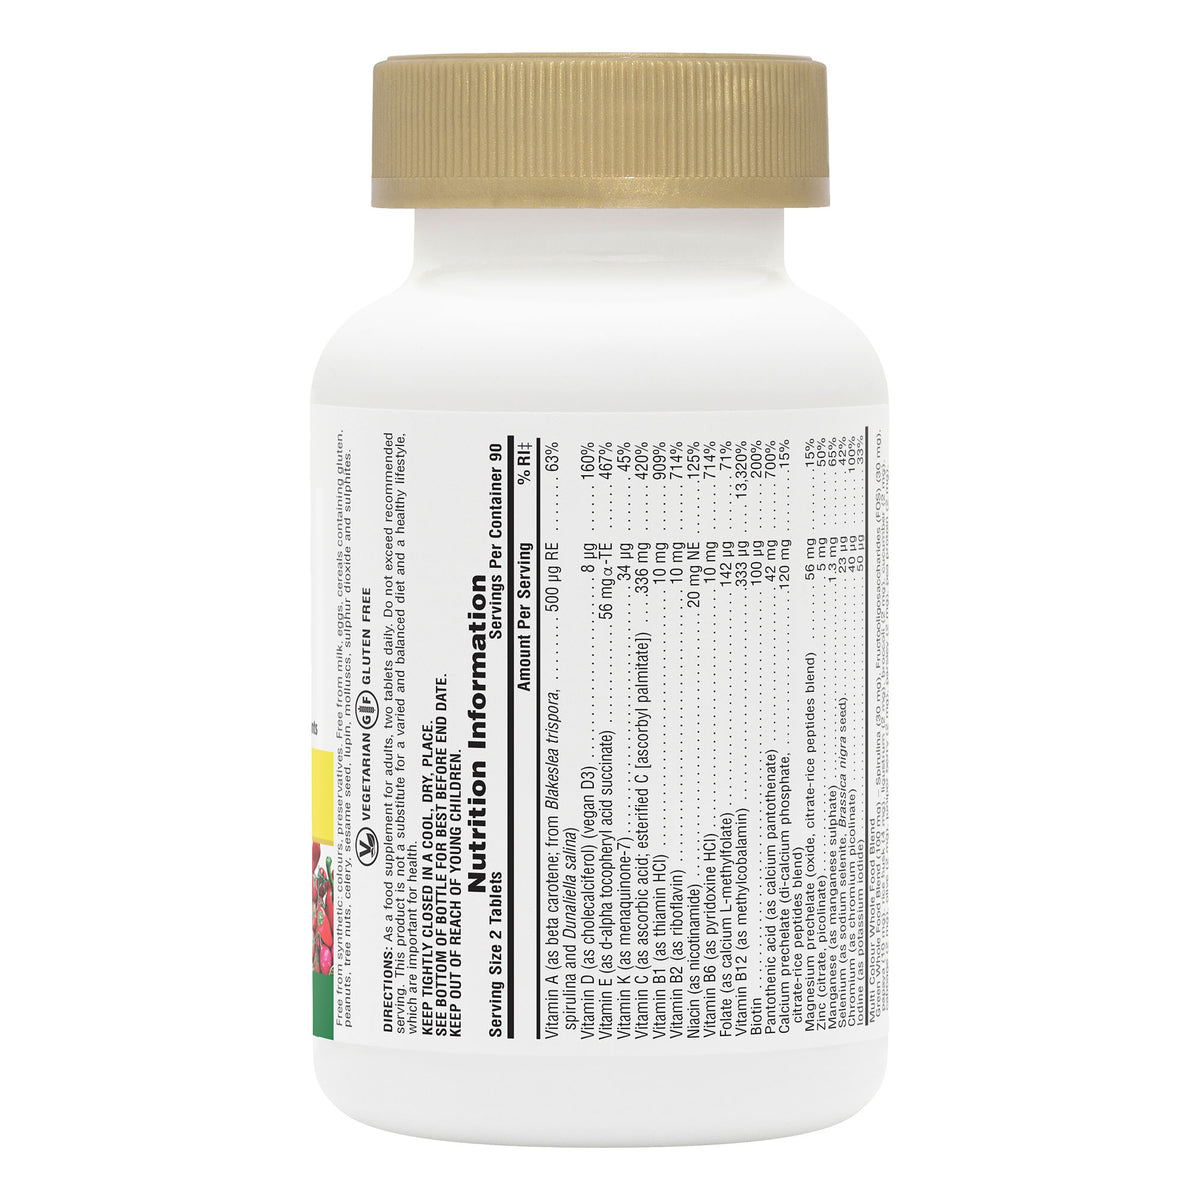 product image of Source of Life® GOLD Multivitamin Mini-Tabs containing Source of Life® GOLD Multivitamin Mini-Tabs